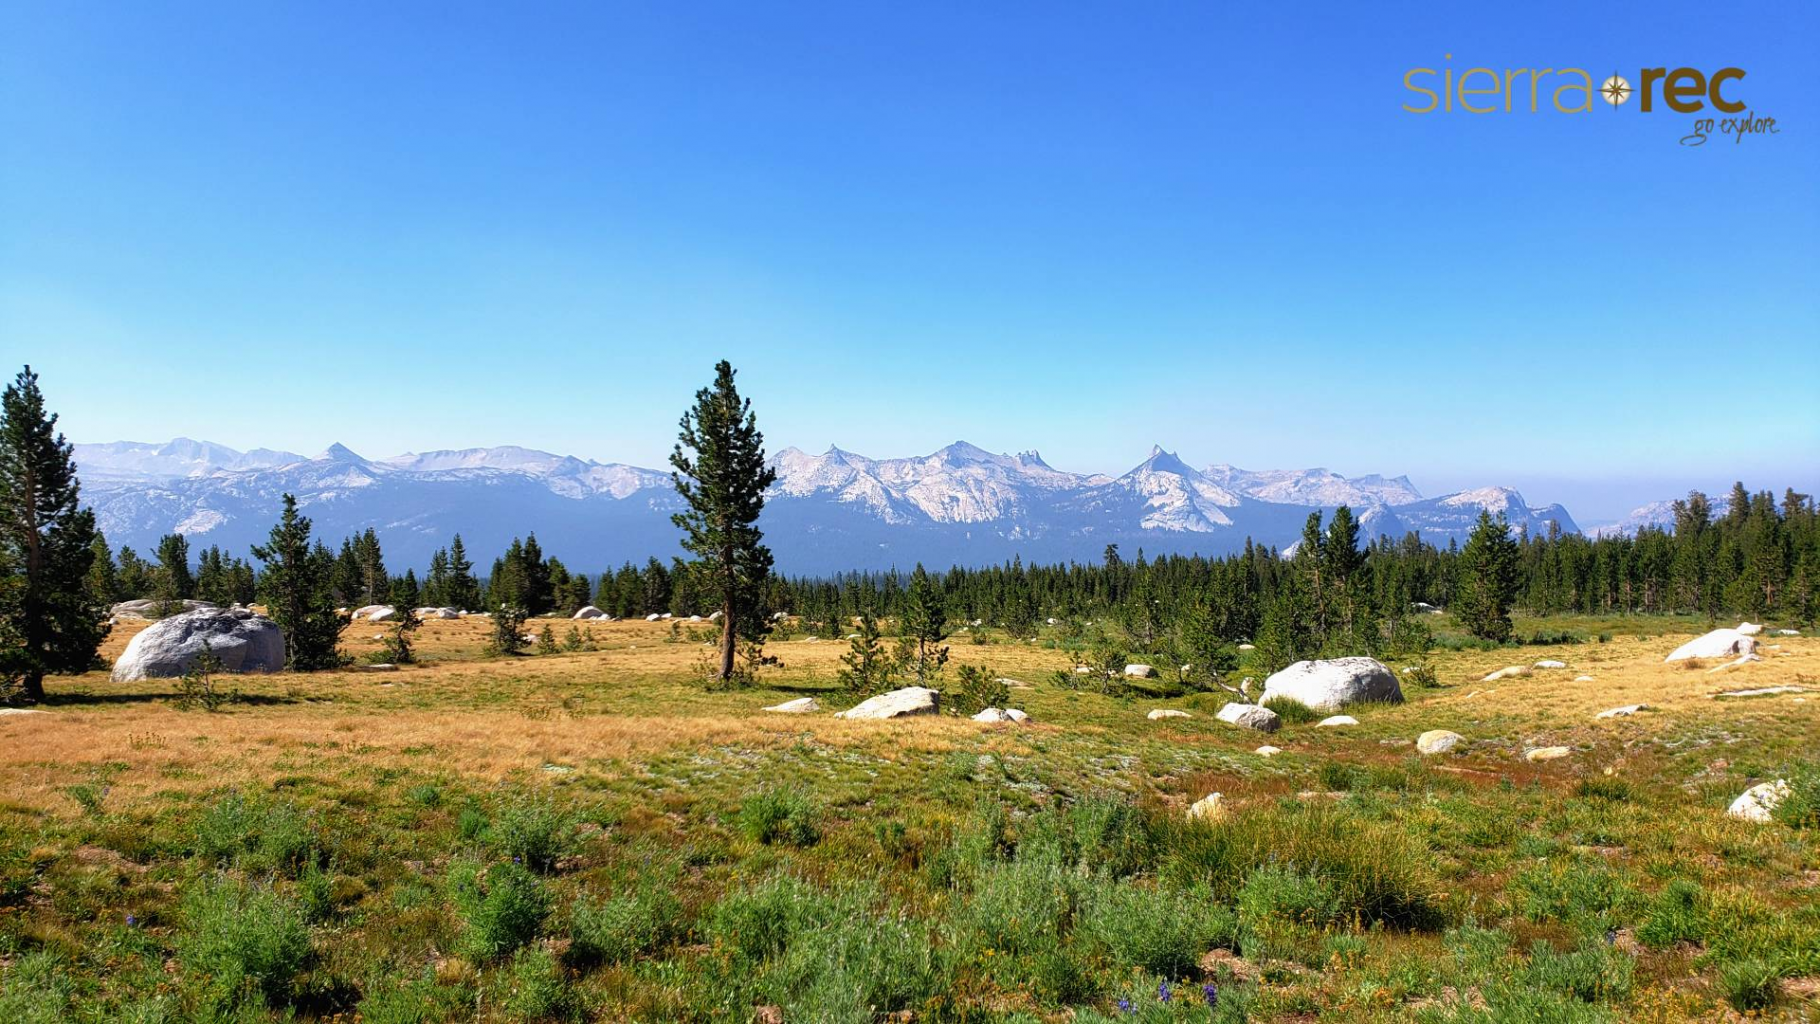 High Sierra Vista panoramic view of the Cathedral Range